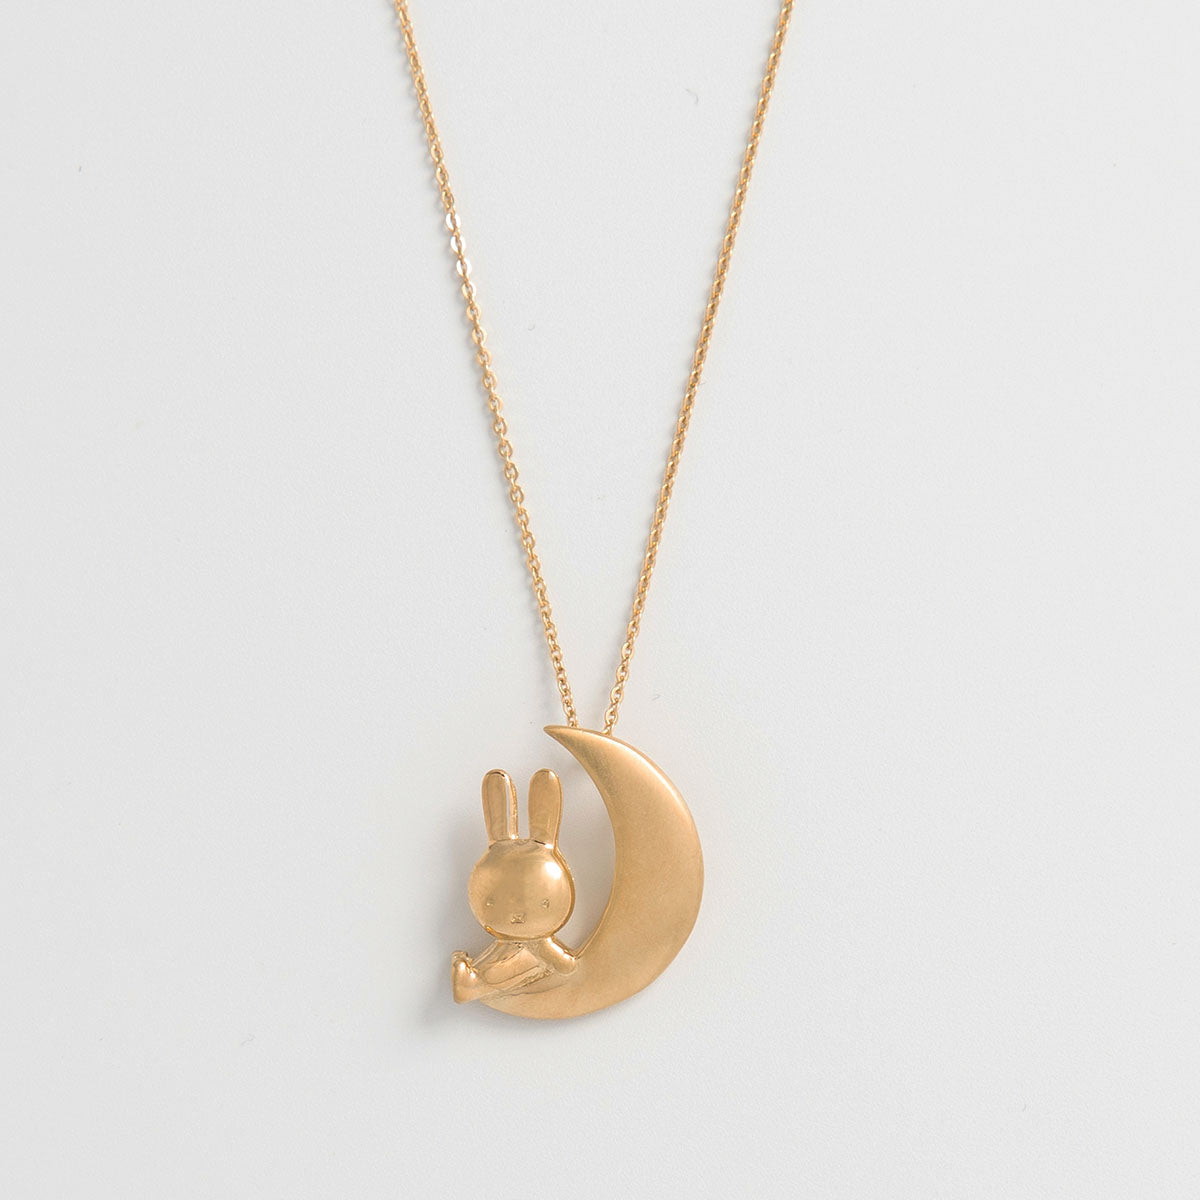 Miffy and the moon necklace gold vermeil